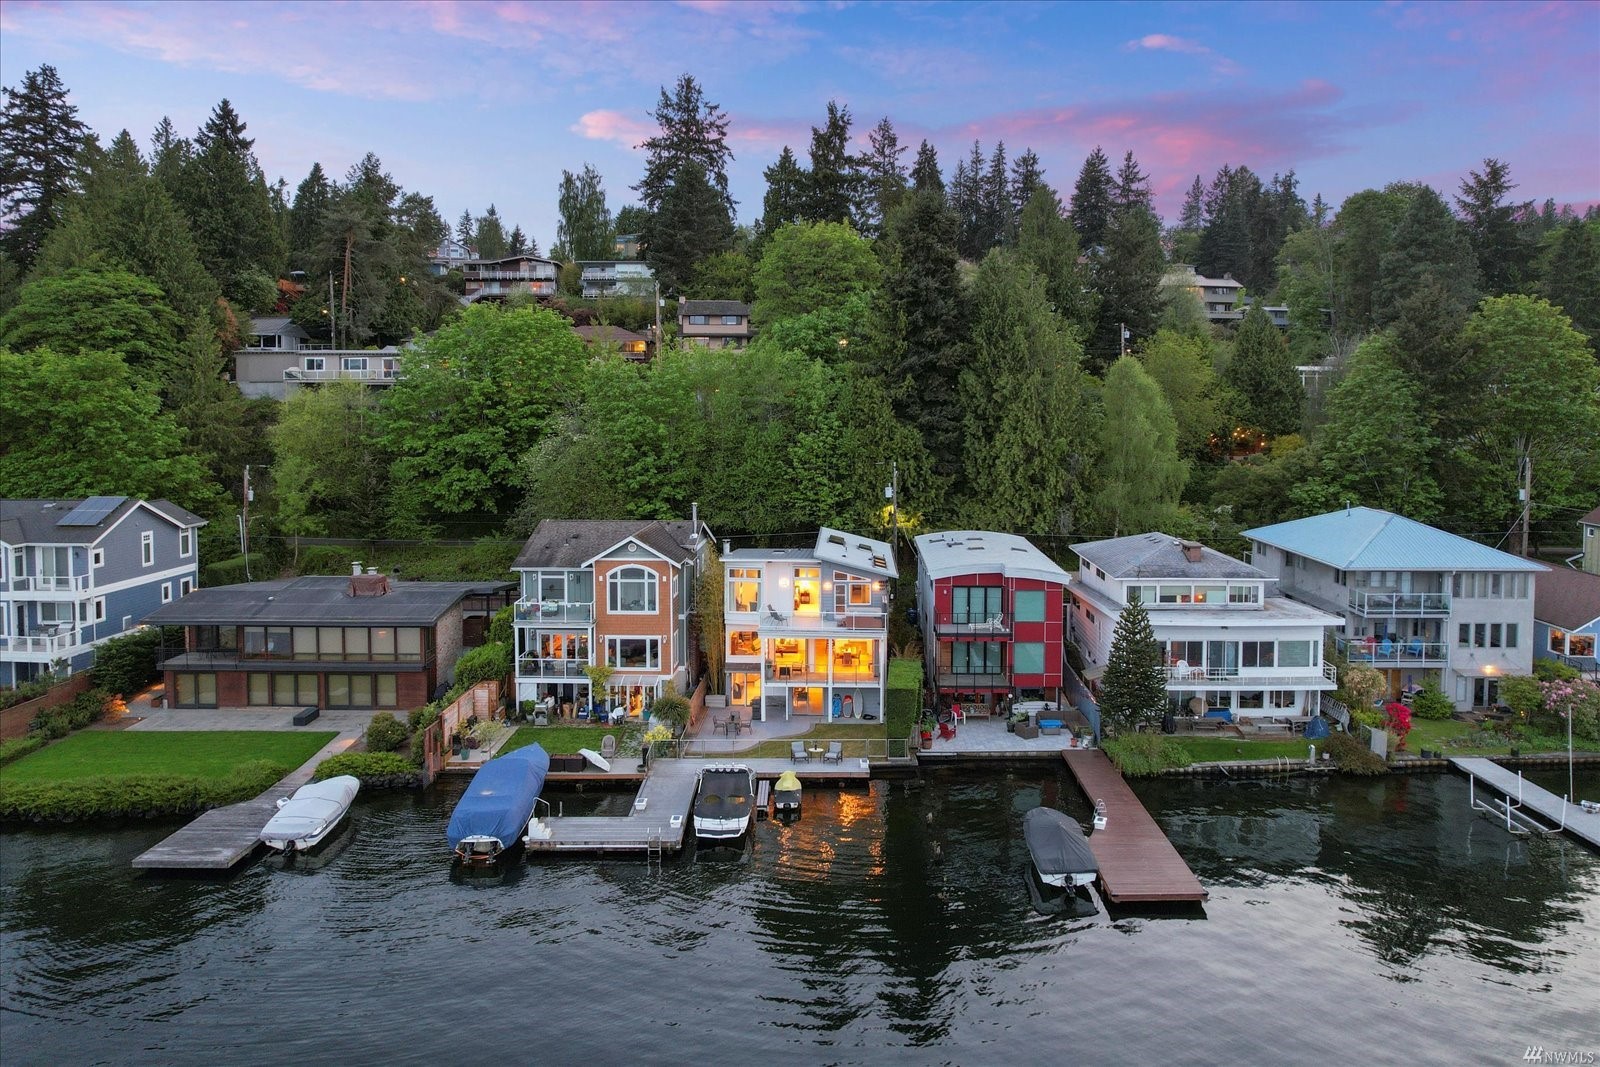 A distant view from Lake Washington of the Matthews Beach home